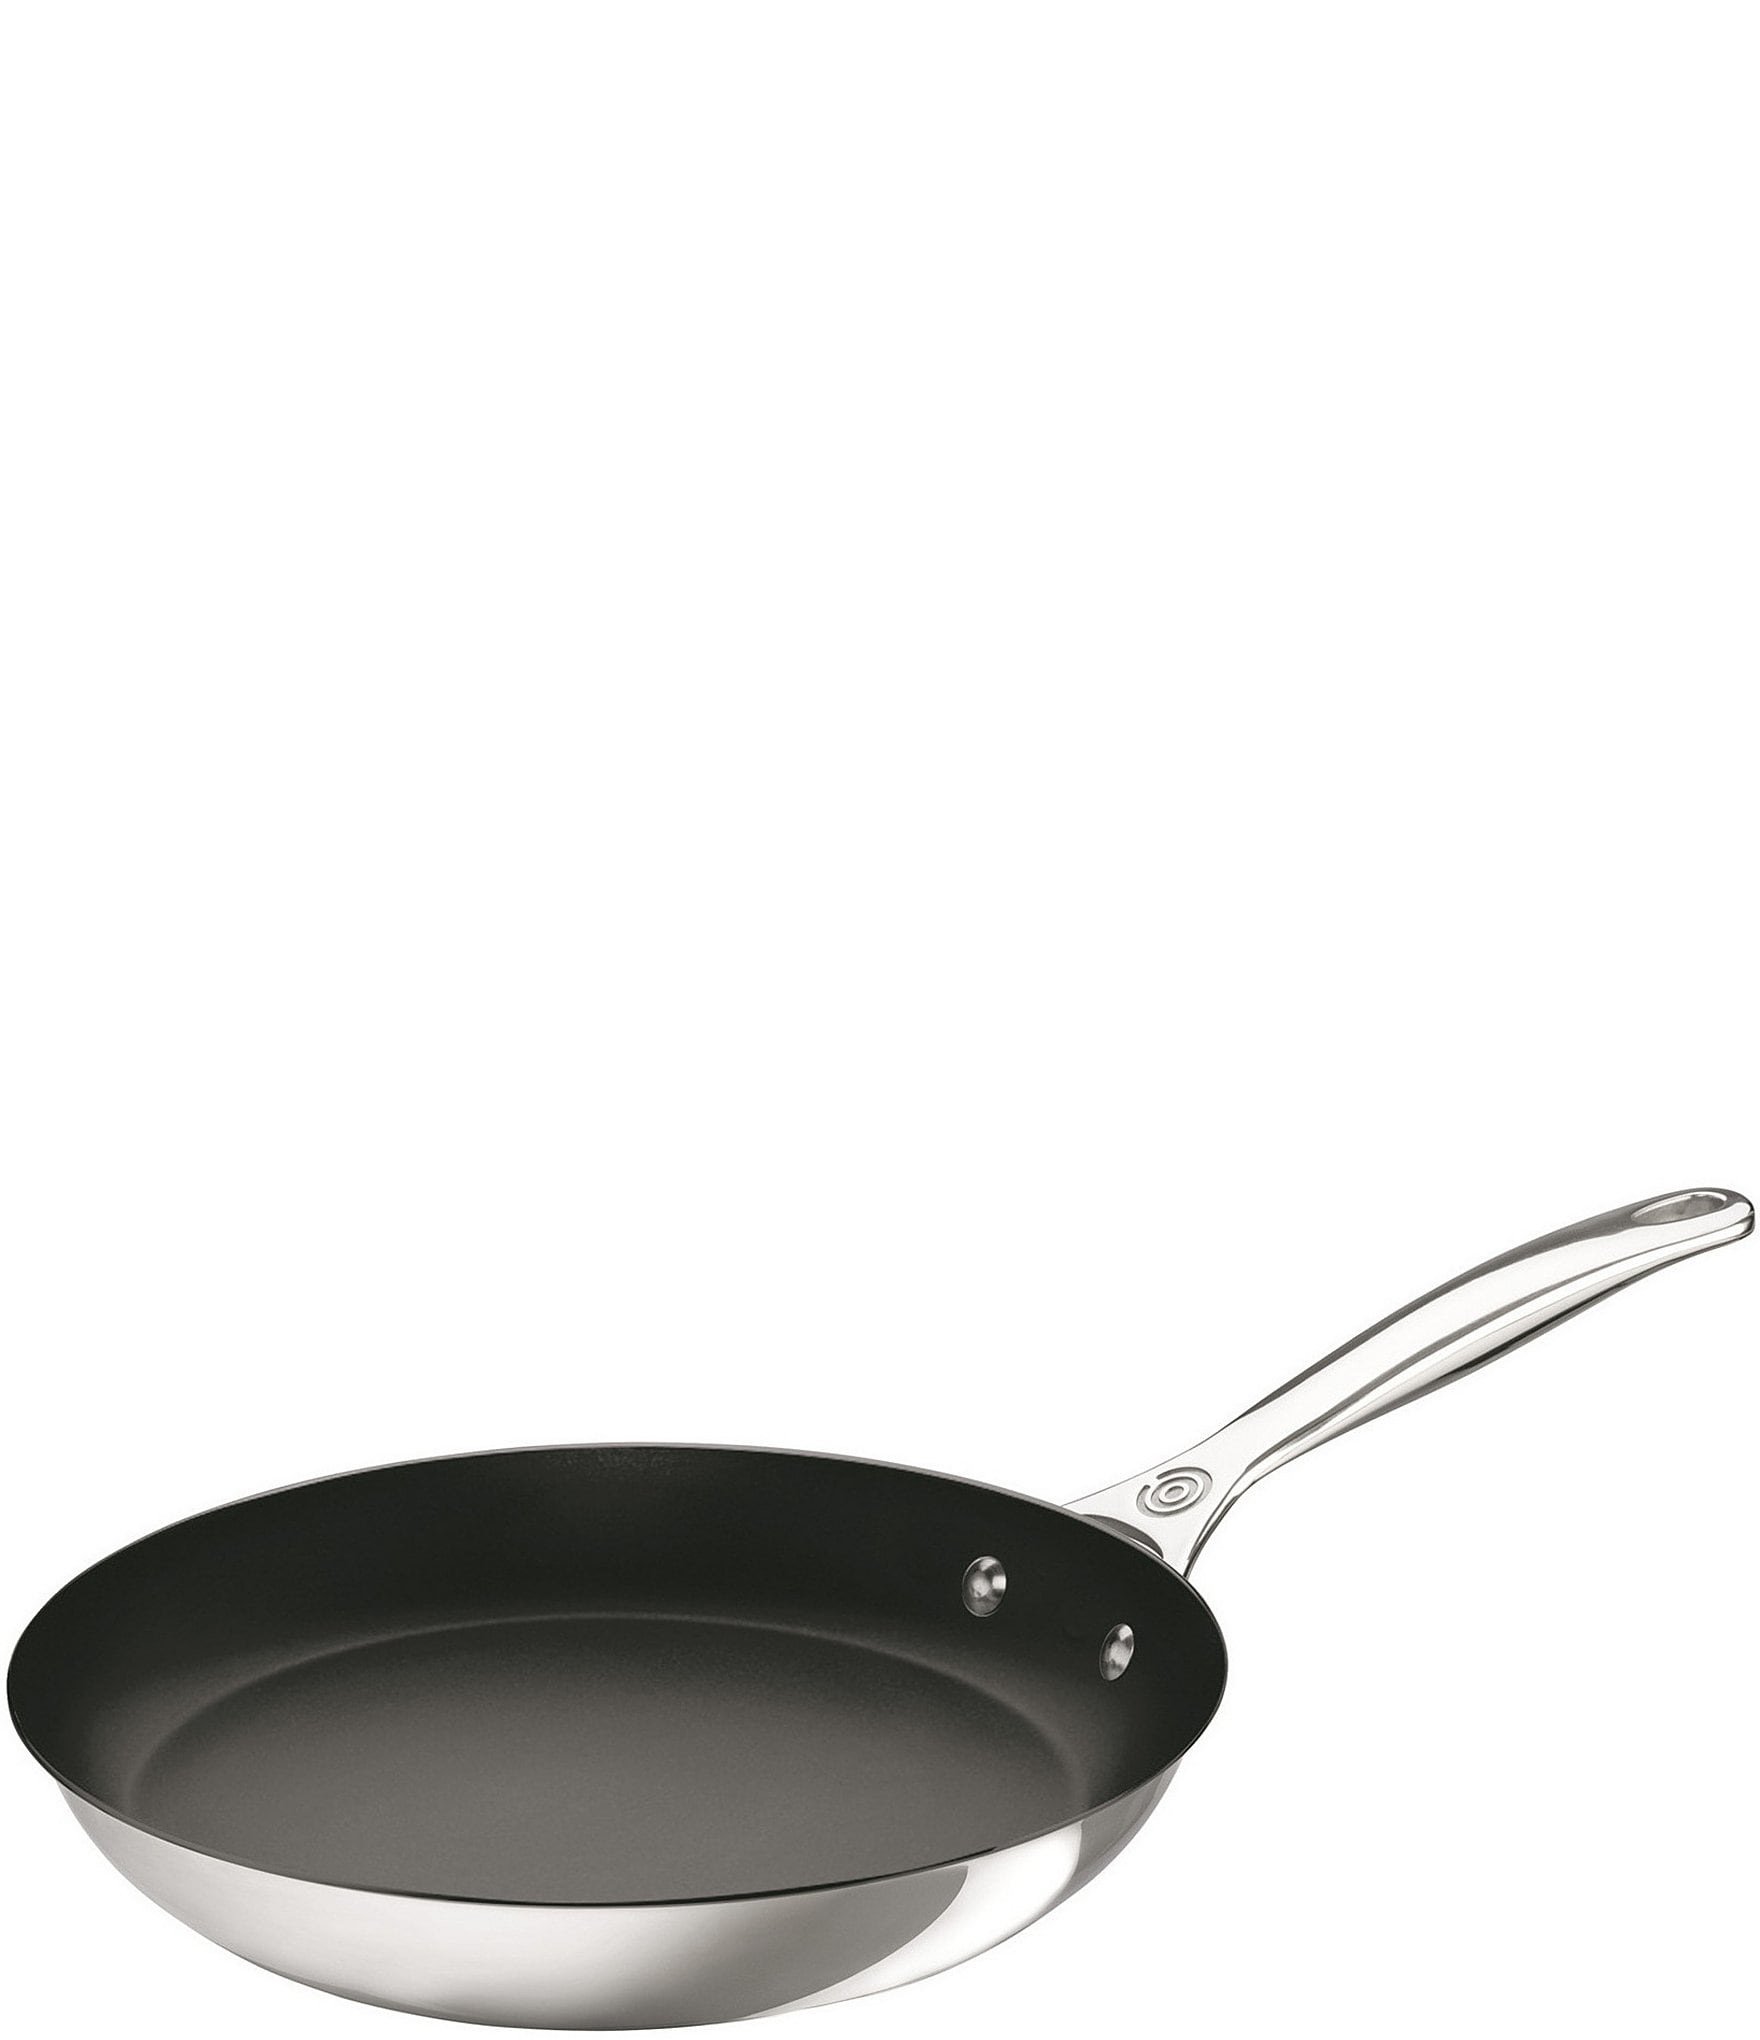 https://dimg.dillards.com/is/image/DillardsZoom/zoom/le-creuset-stainless-steel-non-stick-fry-pan/00000001_zi_stainless_steel05787266.jpg